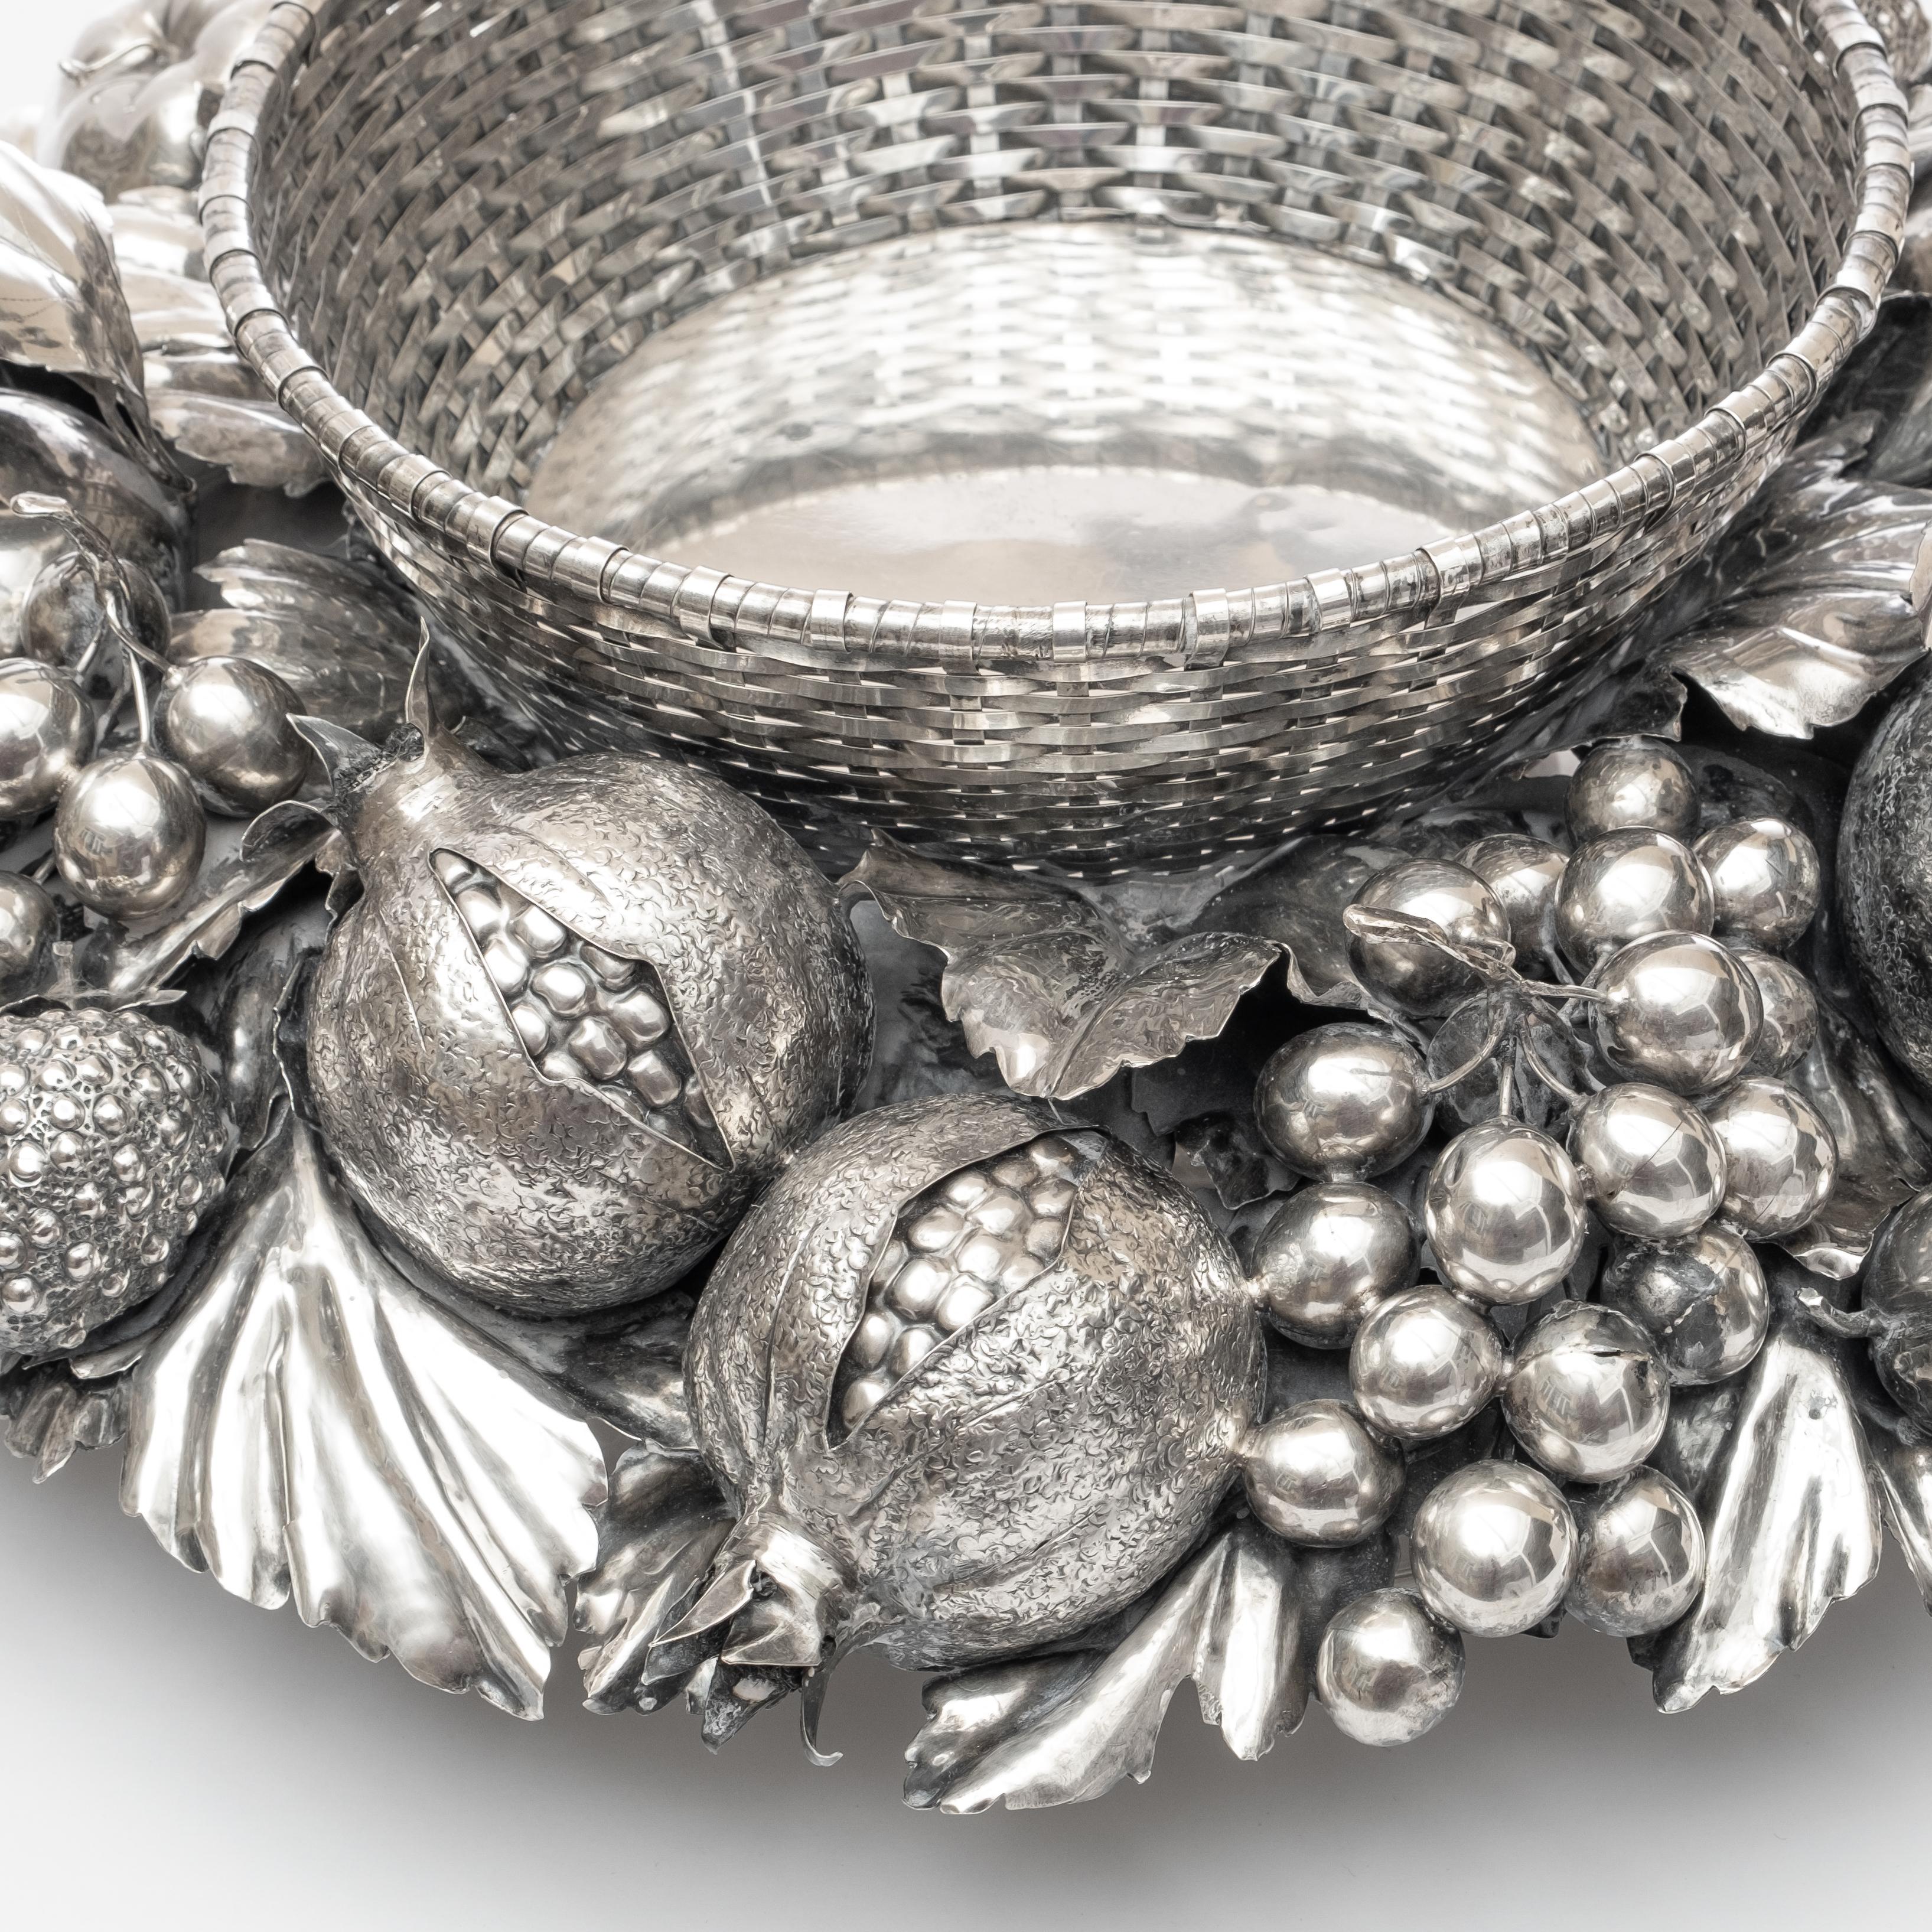 Substantial Gianmaria Buccellati silver centerpiece bowl having woven circular basket centered by sculpted silver fruit and foliate, comprising of various leaves and stemmed fruits to include pears, strawberries, apples, grapes, pomegranate, figs